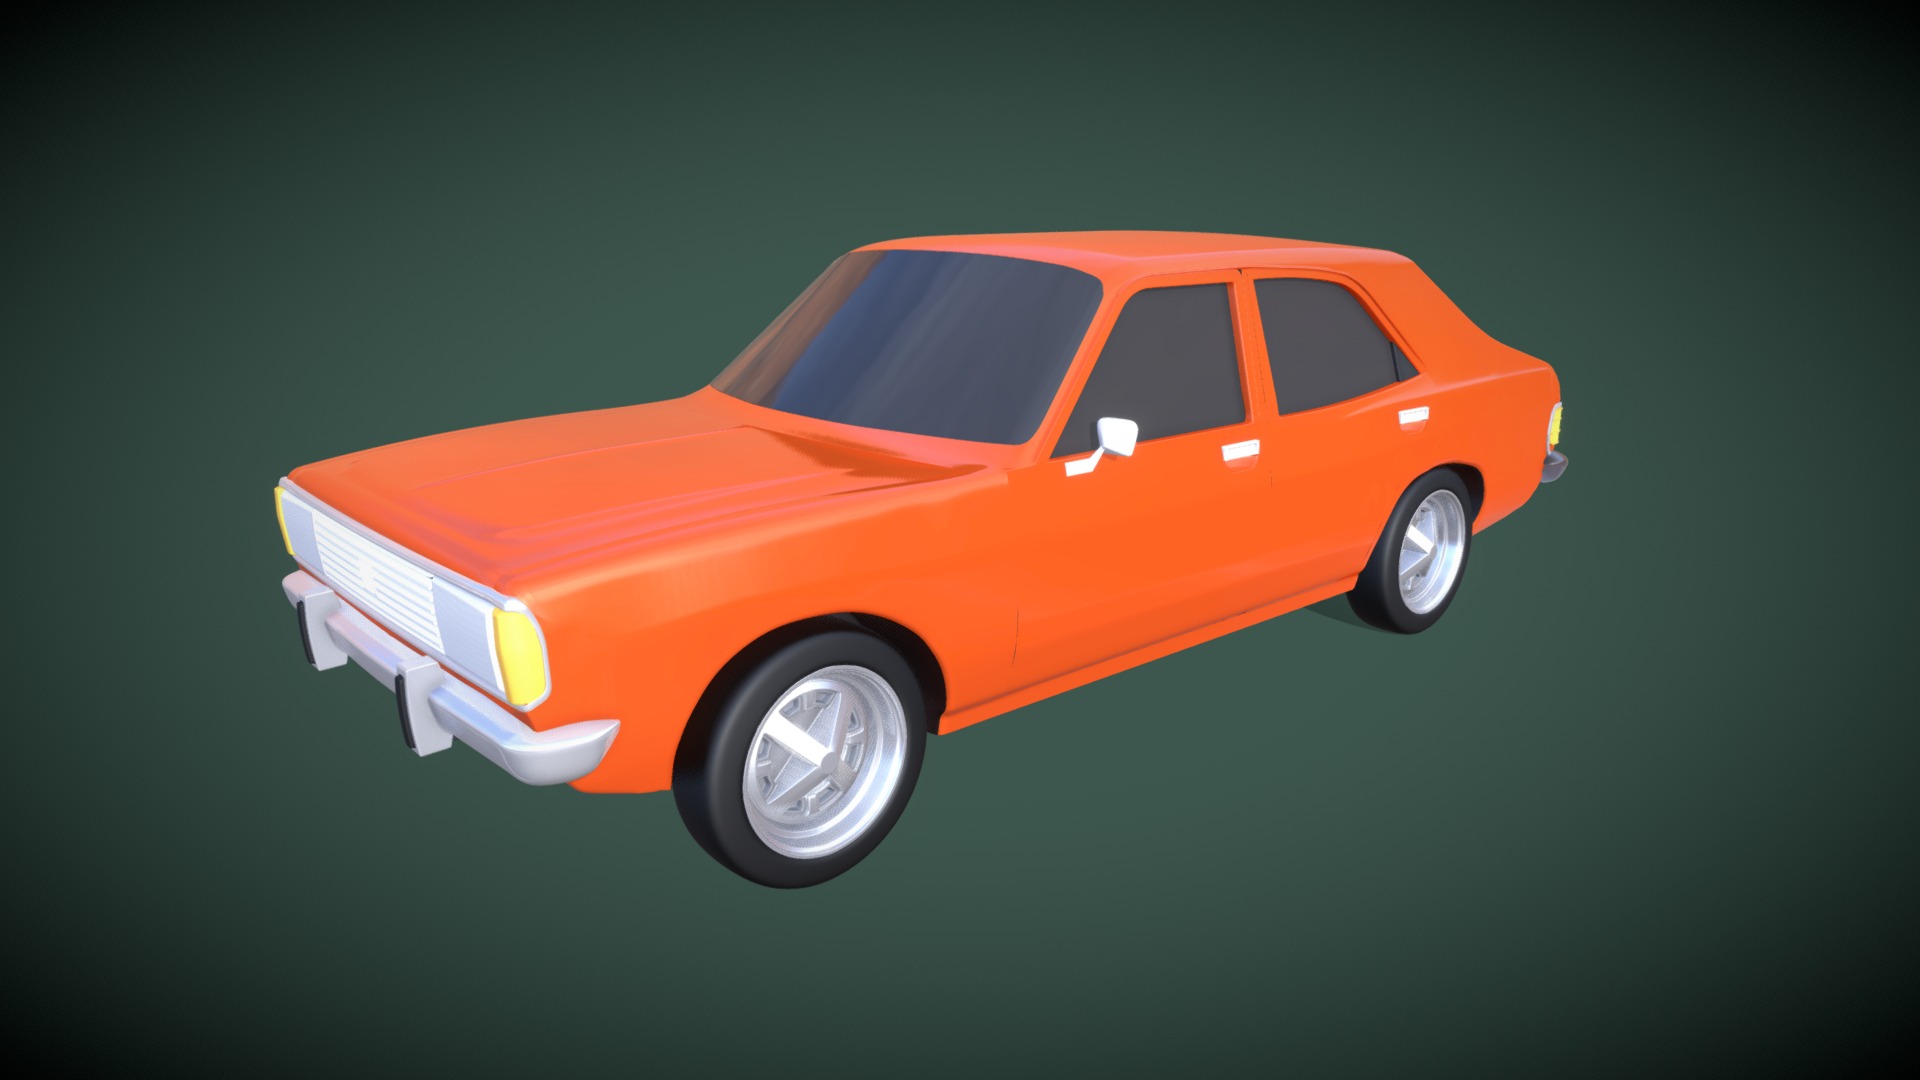 3D model Dodge 1500 - This is a 3D model of the Dodge 1500. The 3D model is about a small orange car.